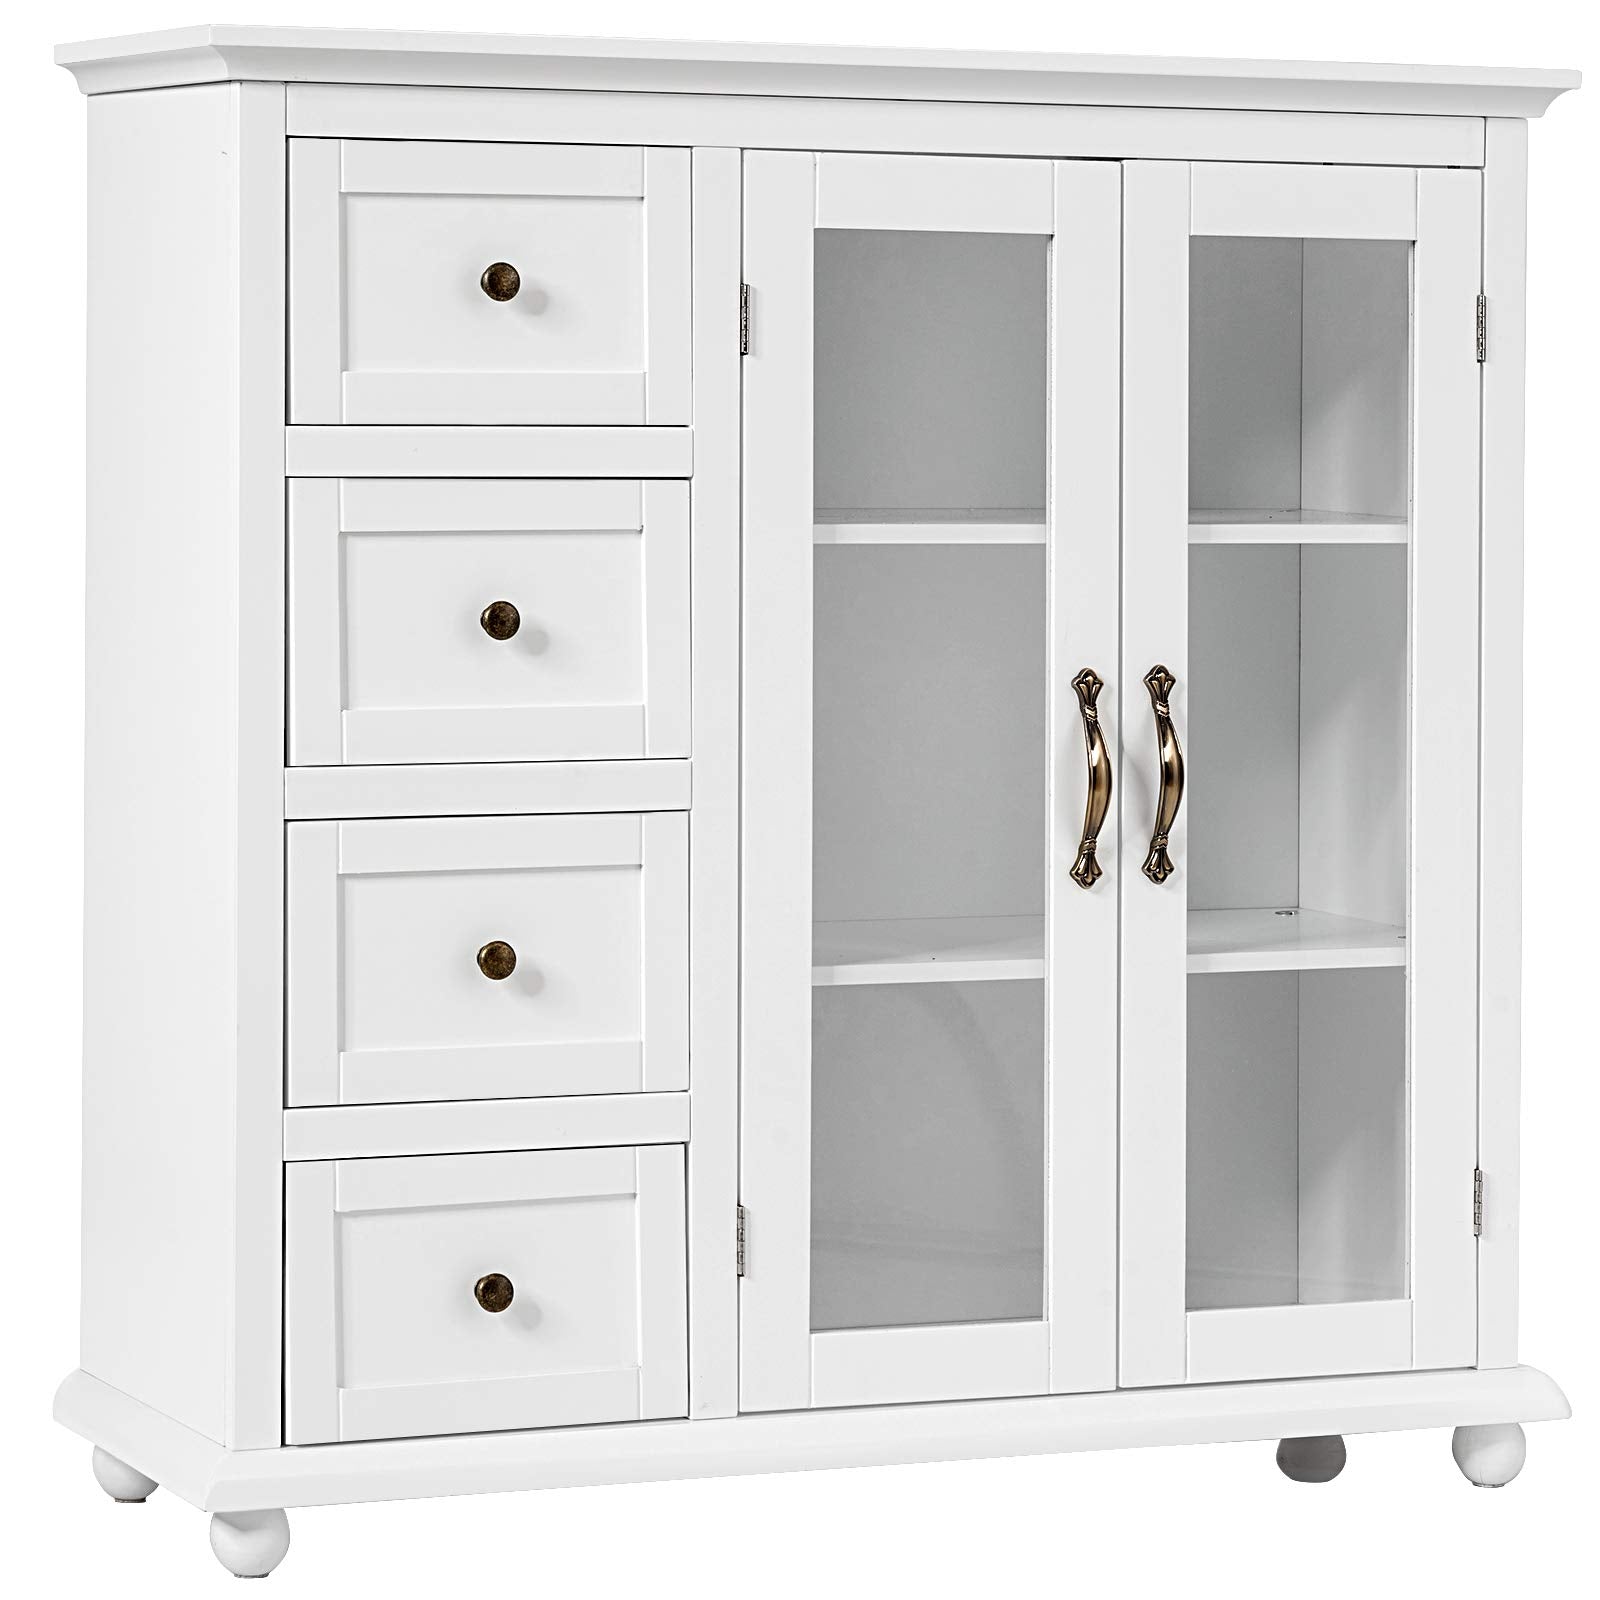 Giantex Buffet Sideboard with Storage - Kitchen Pantry Cabinet with 2 Doors, 4 Drawers, Adjustable Shelf